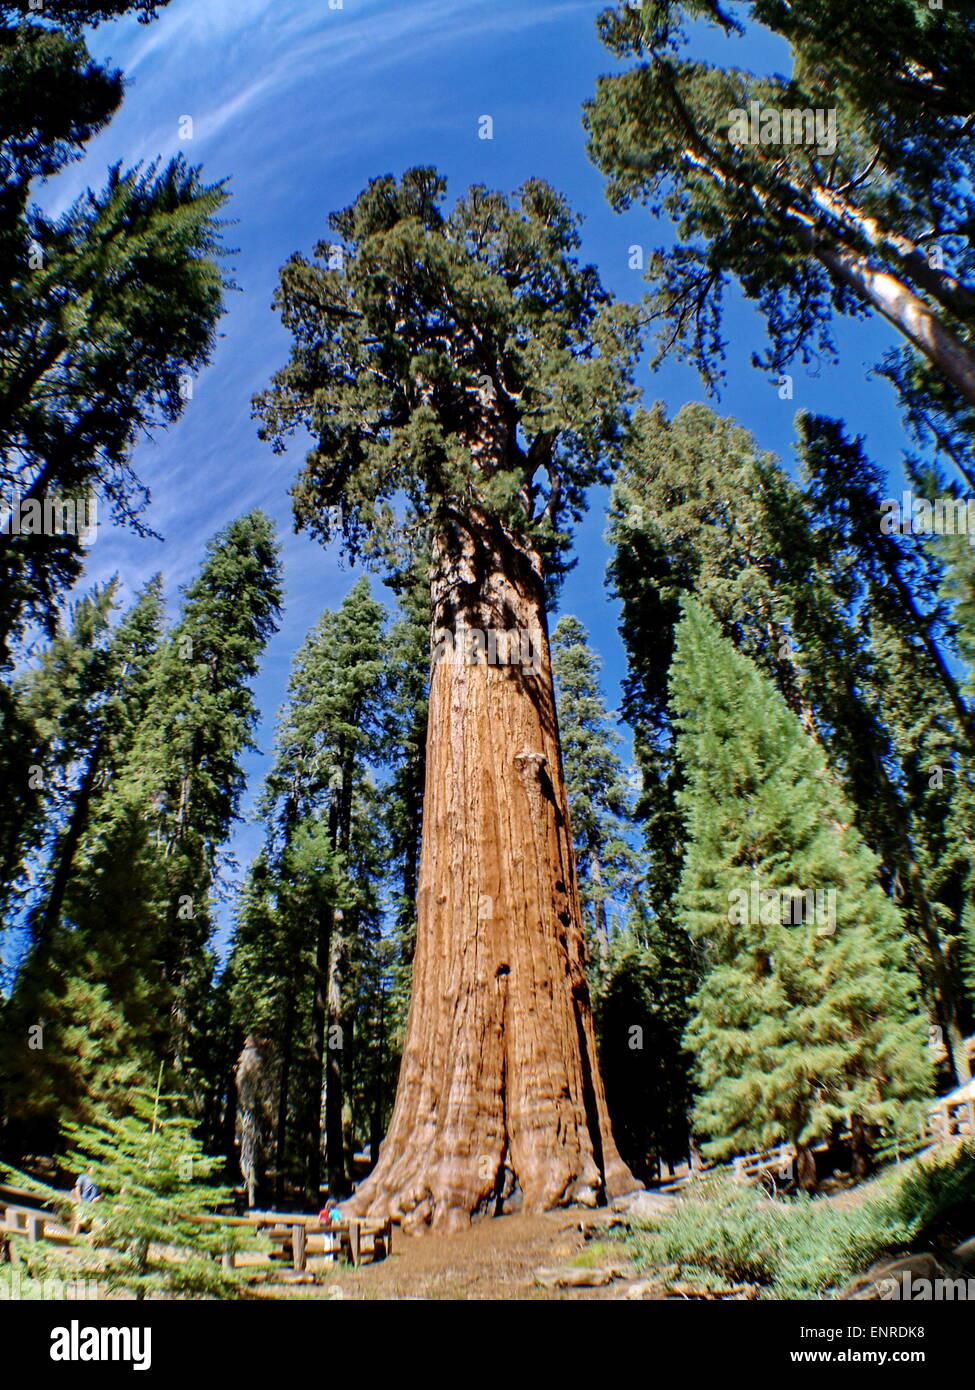 The General Sherman is a giant sequoia tree located in the Giant Forest of Sequoia National Park Stock Photo